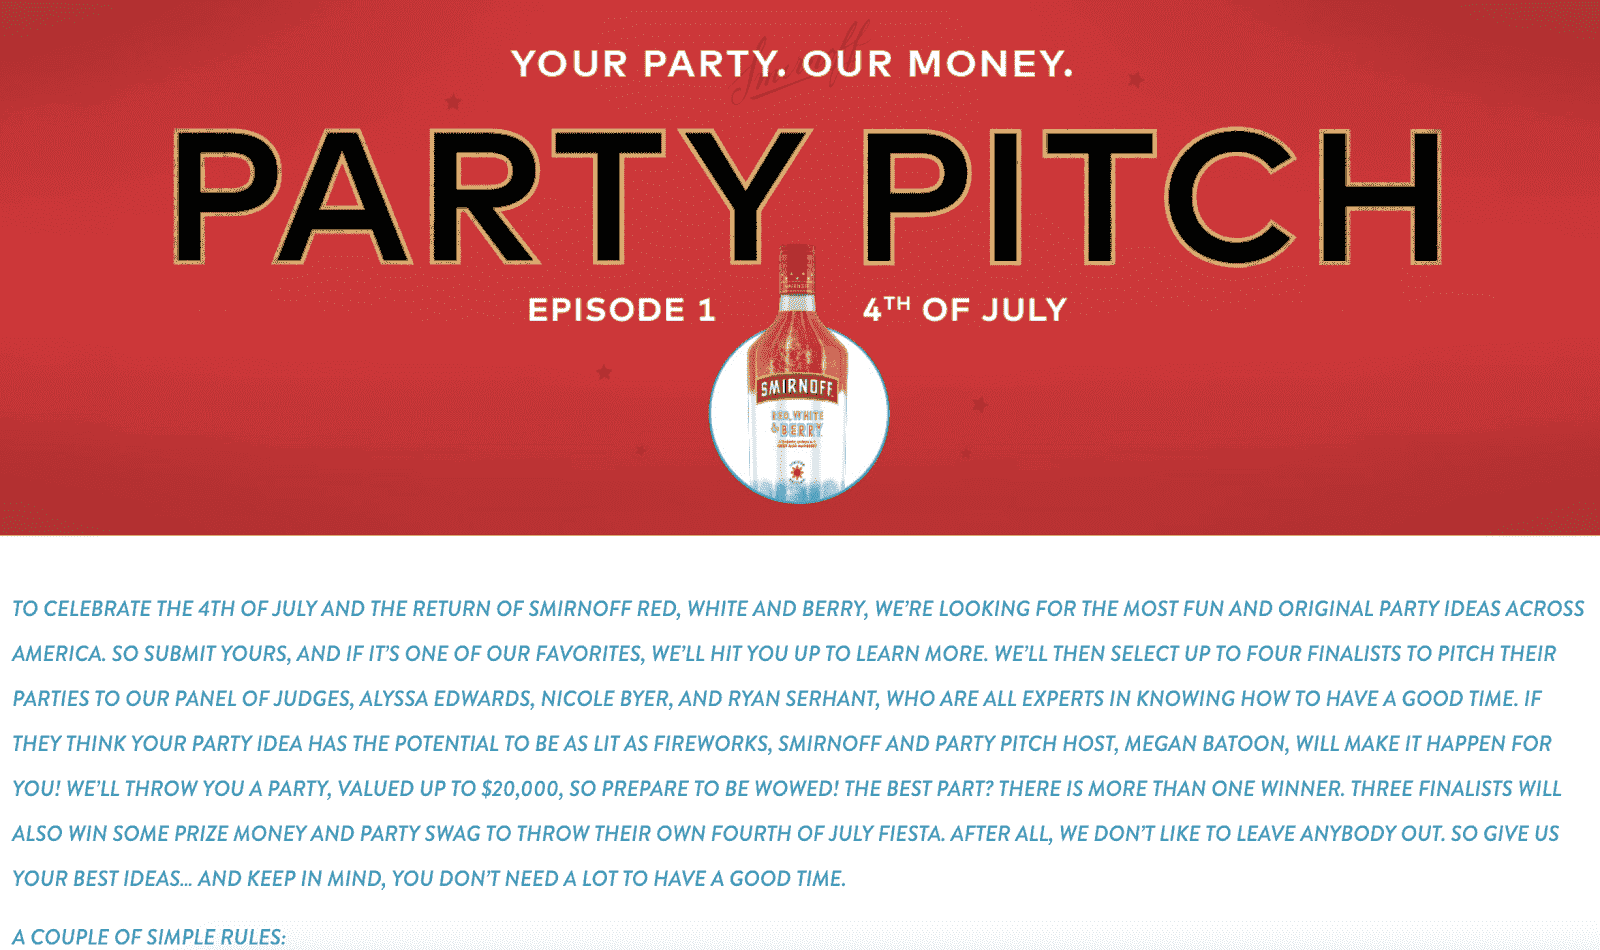 Smirnoff: 4th of July Party Pitch